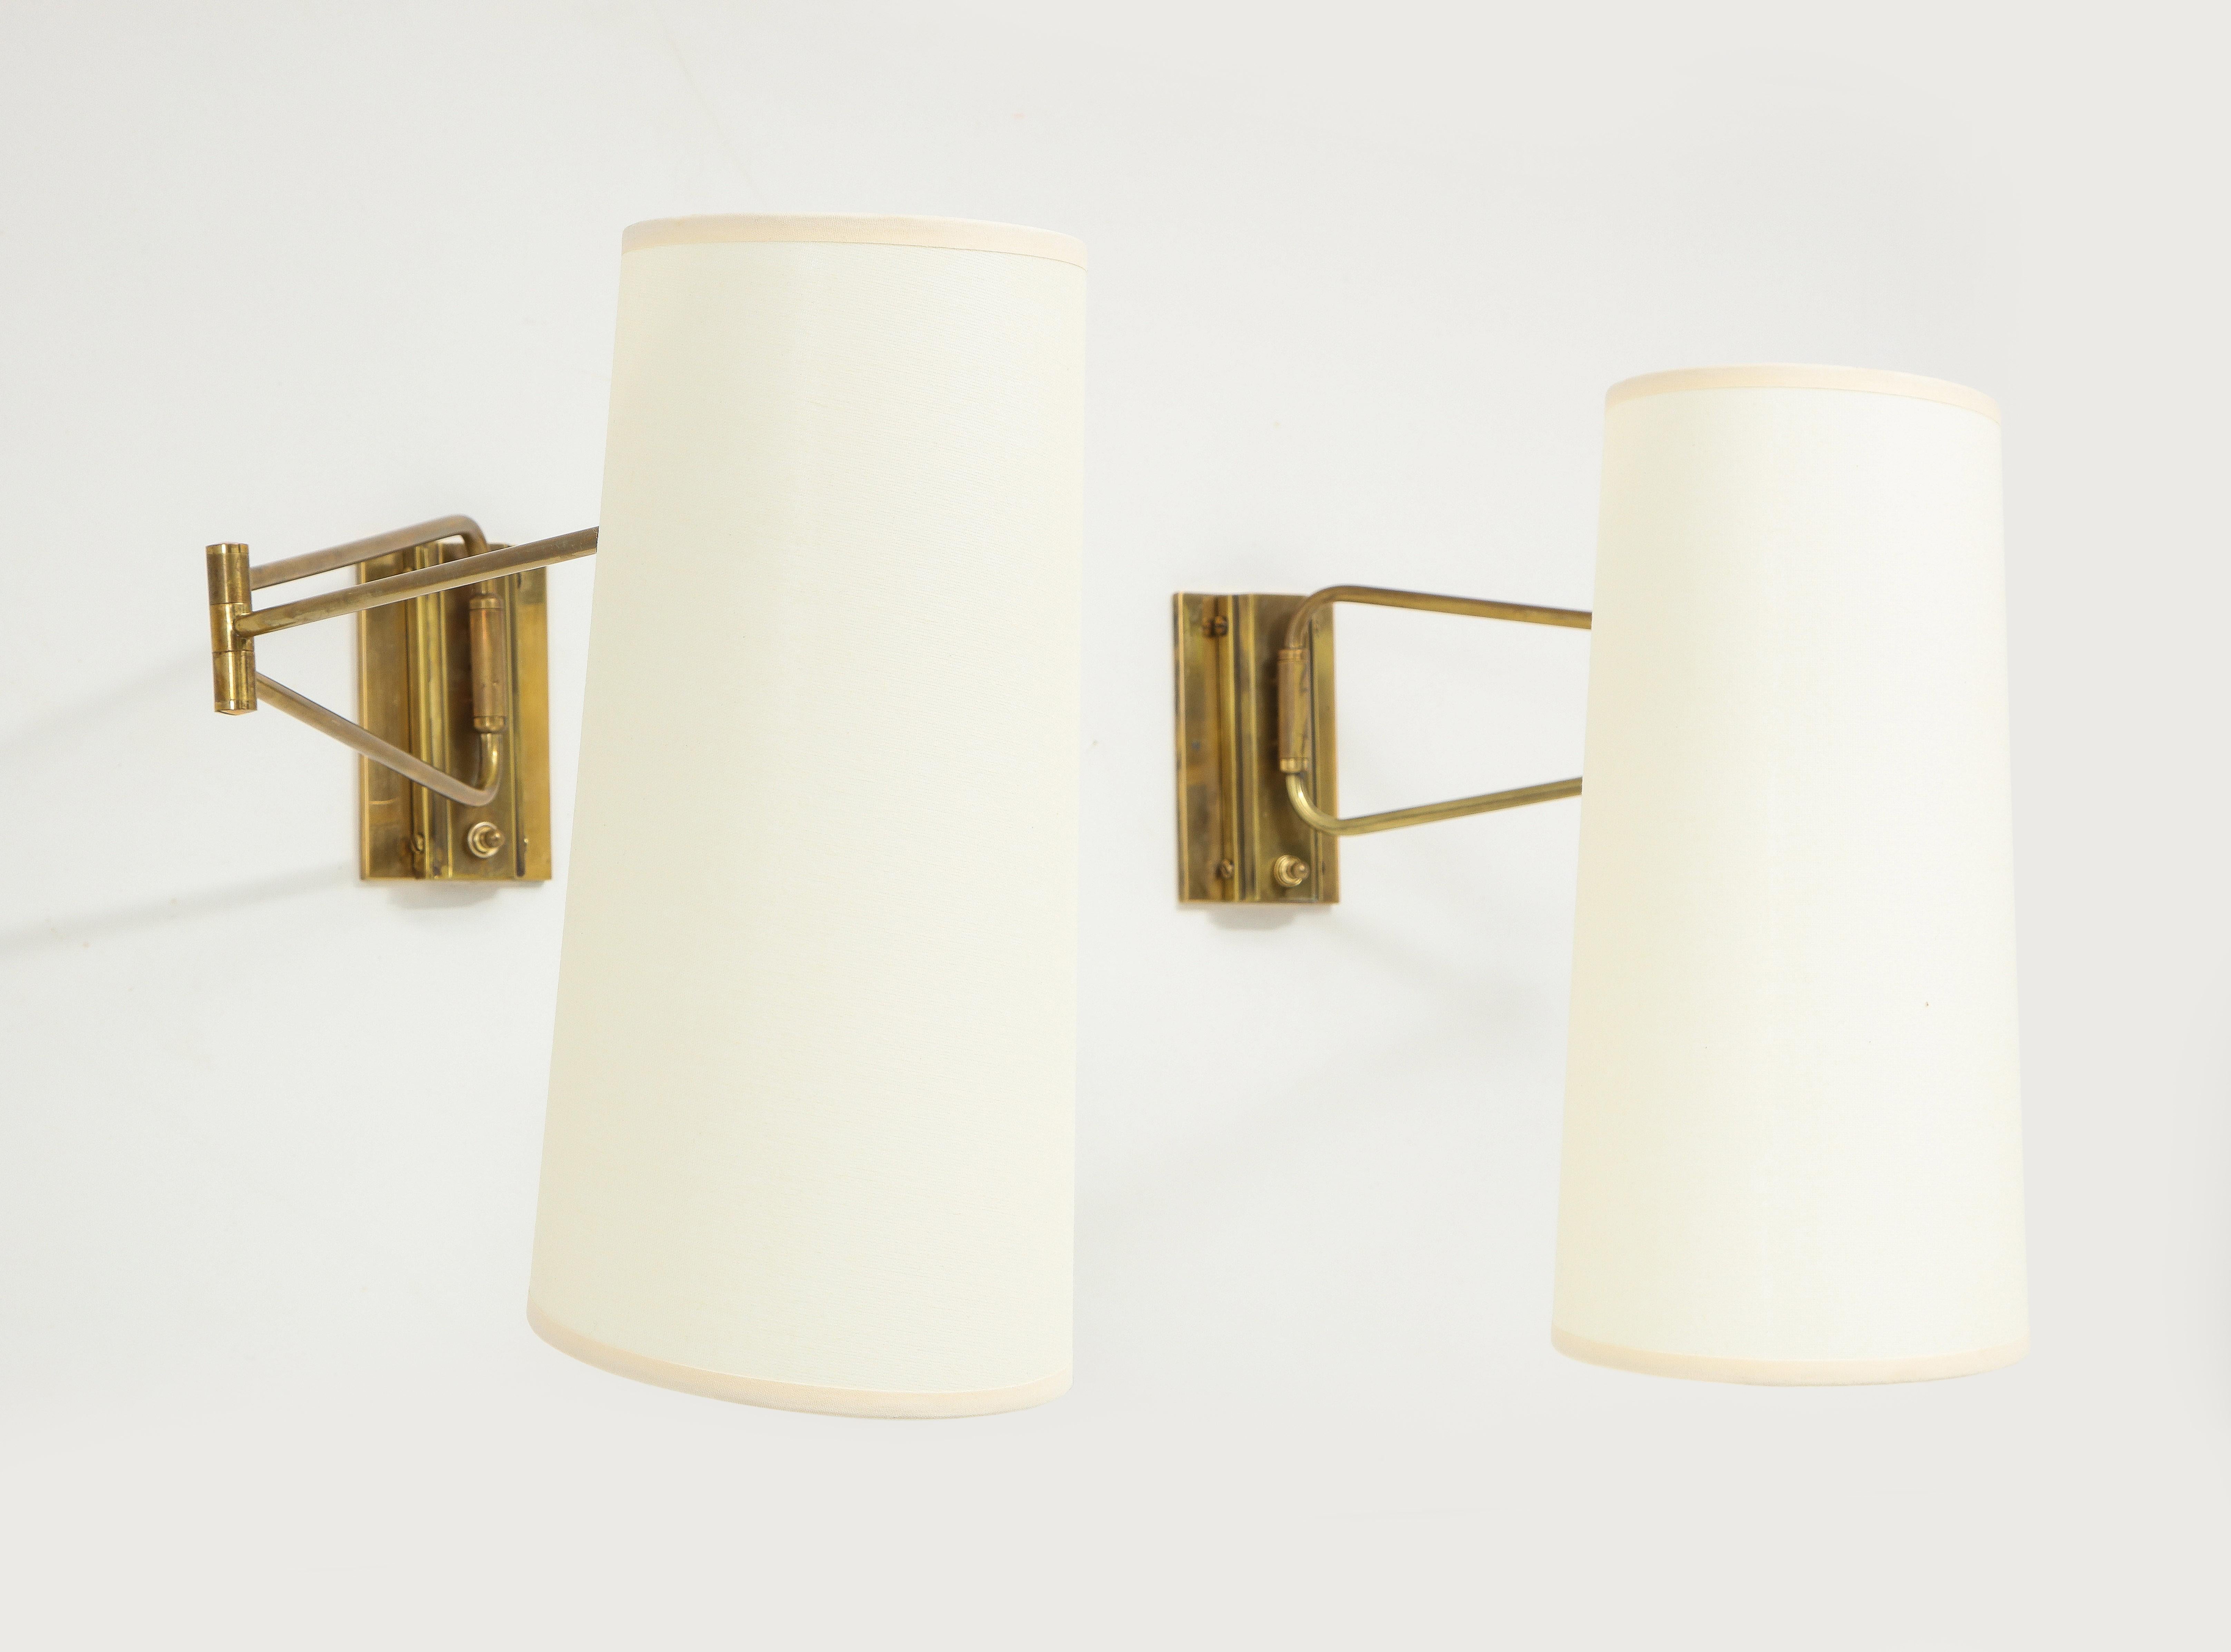 Pair of Brass Lunel Swingarm Sconces with Paper Shades, France 1960's For Sale 4